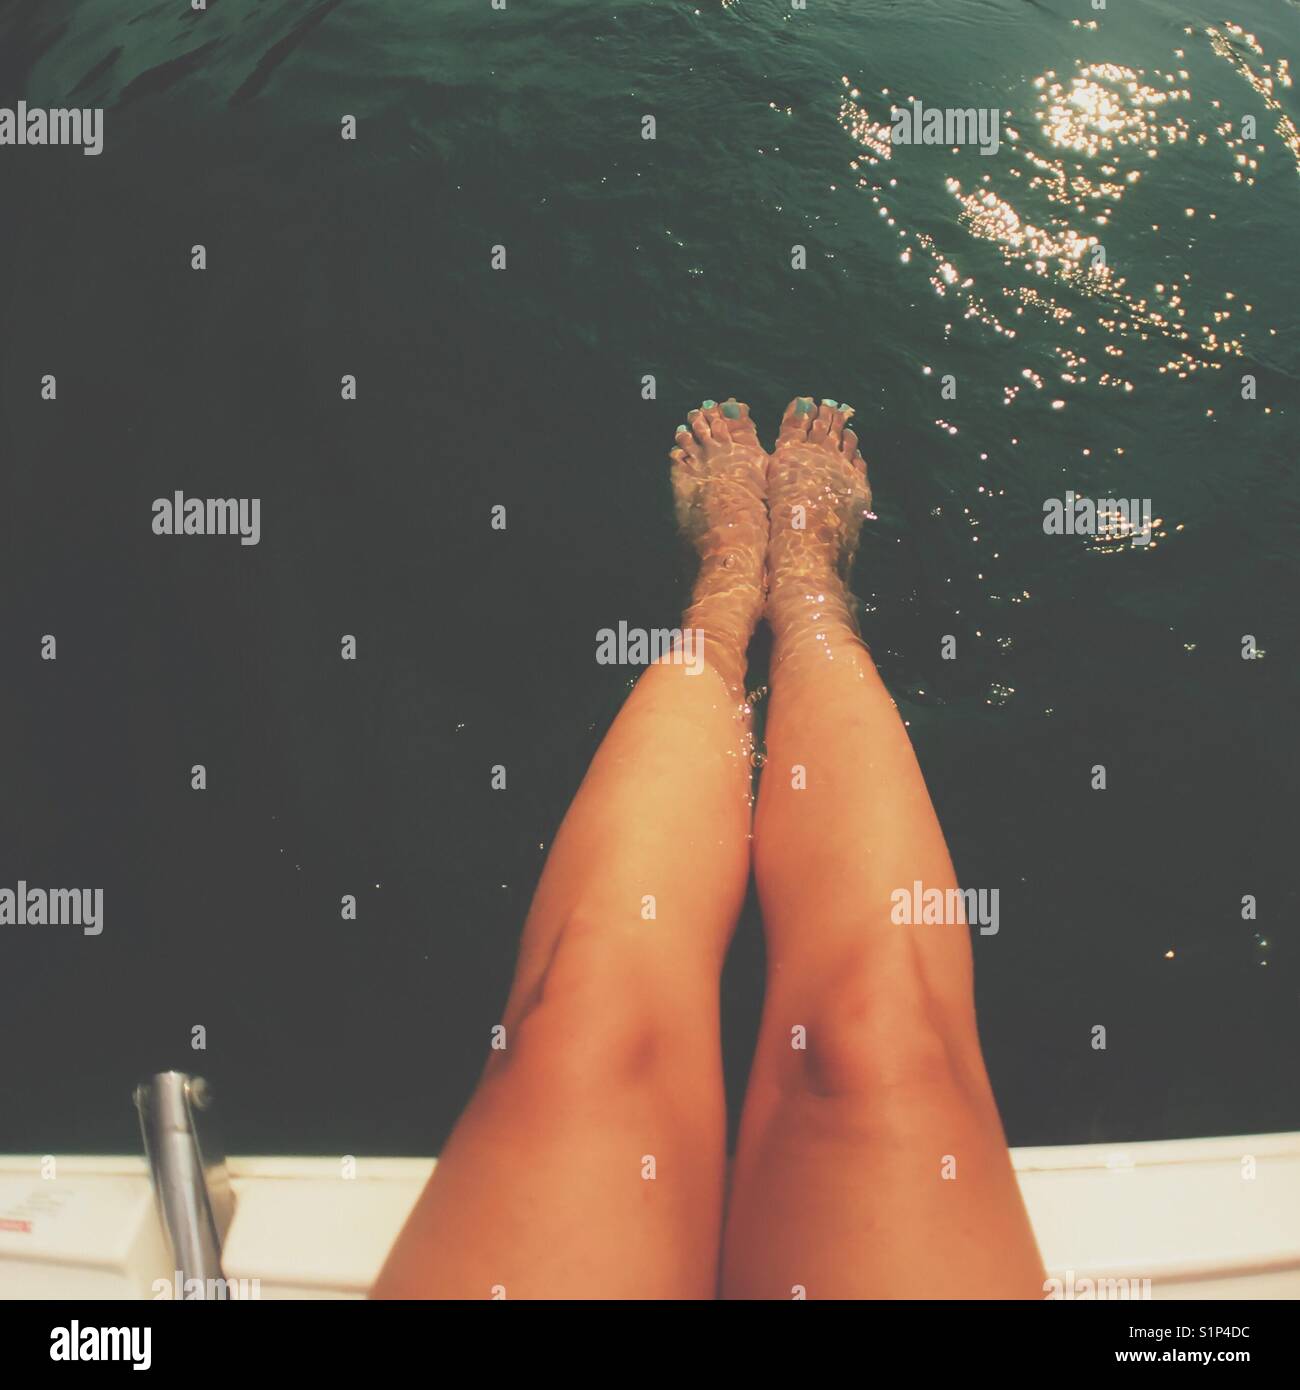 Tanned legs of woman sitting at the edge of a boat with feet submerged in water. Faded edit. Square crop. Stock Photo